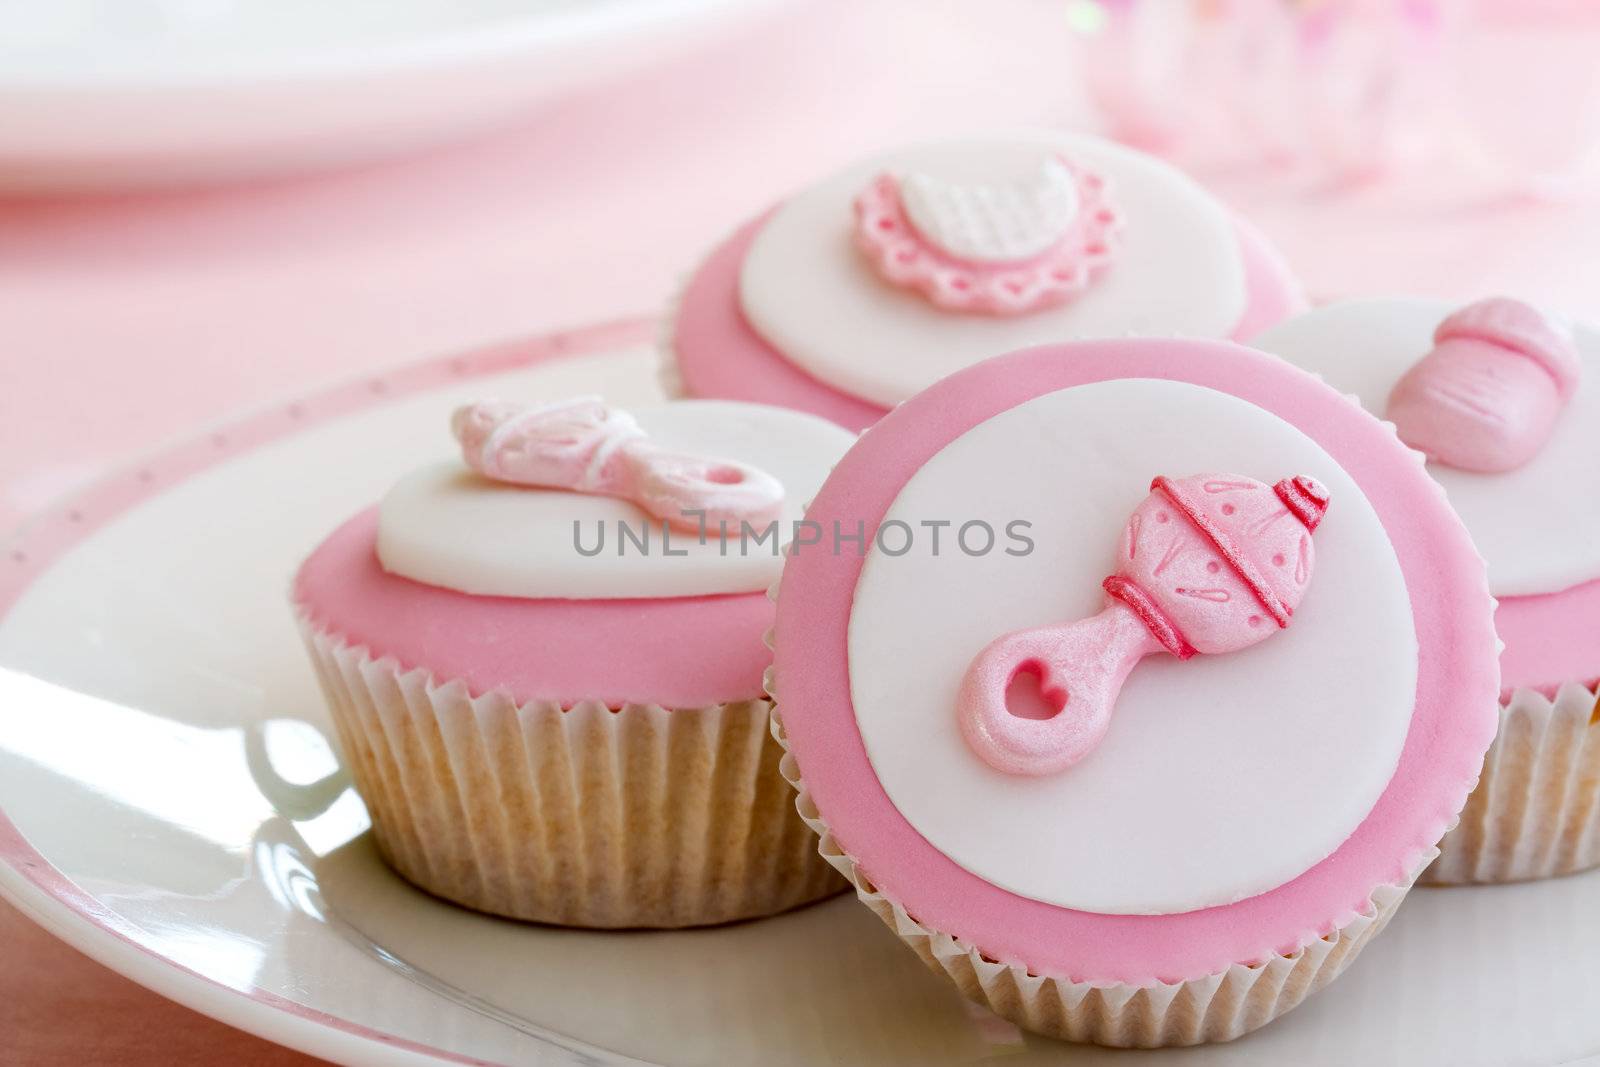 Cupcakes decorated with a baby girl theme